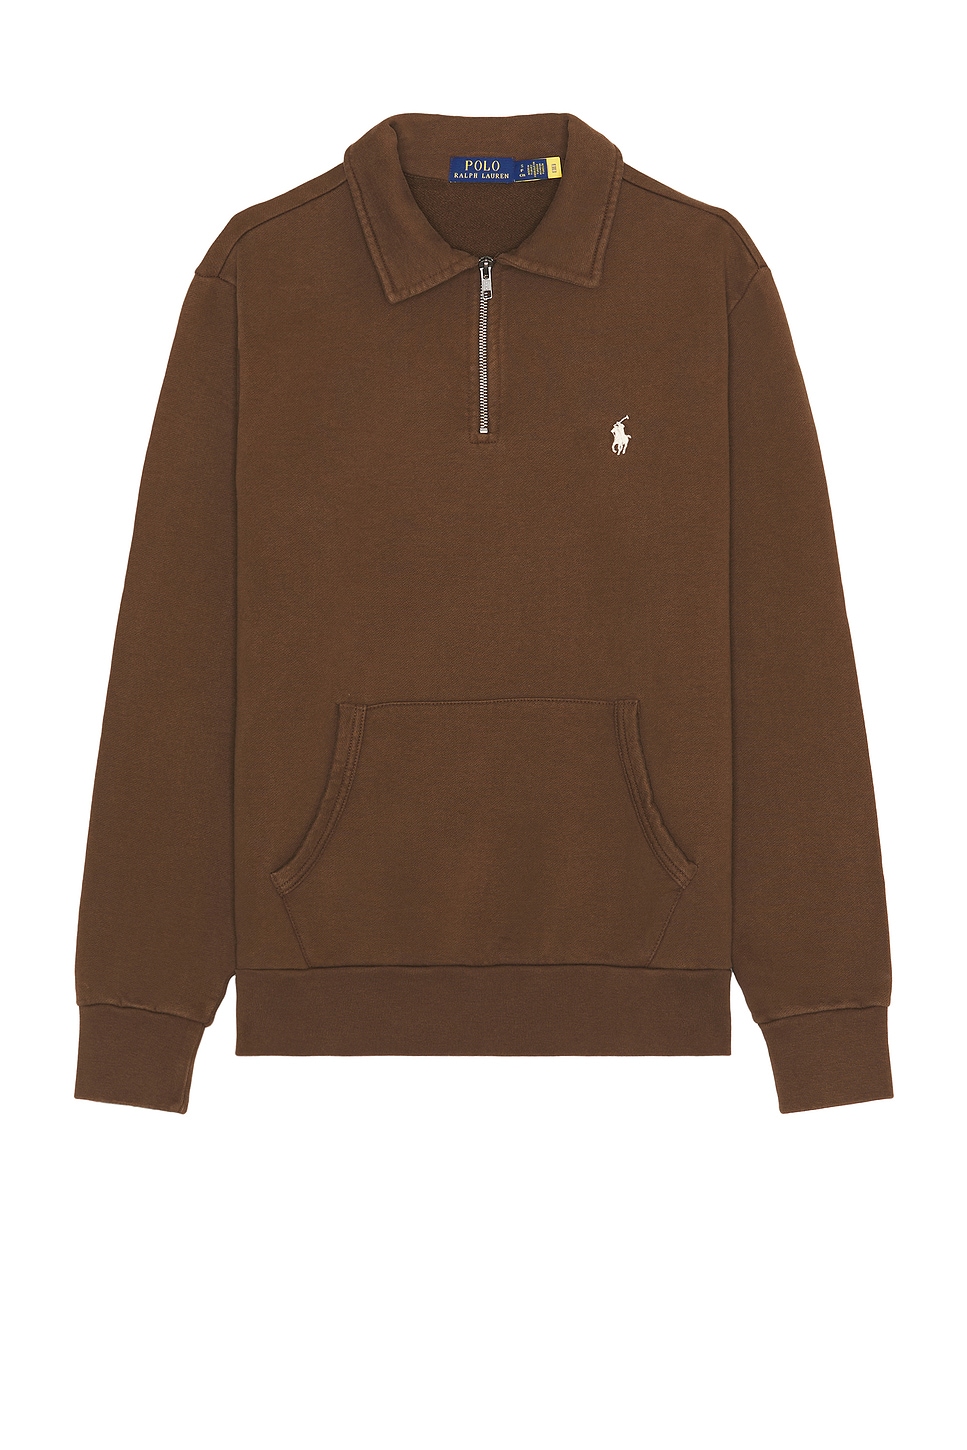 Image 1 of Polo Ralph Lauren Loopback Terry Sweater in Pale Russet